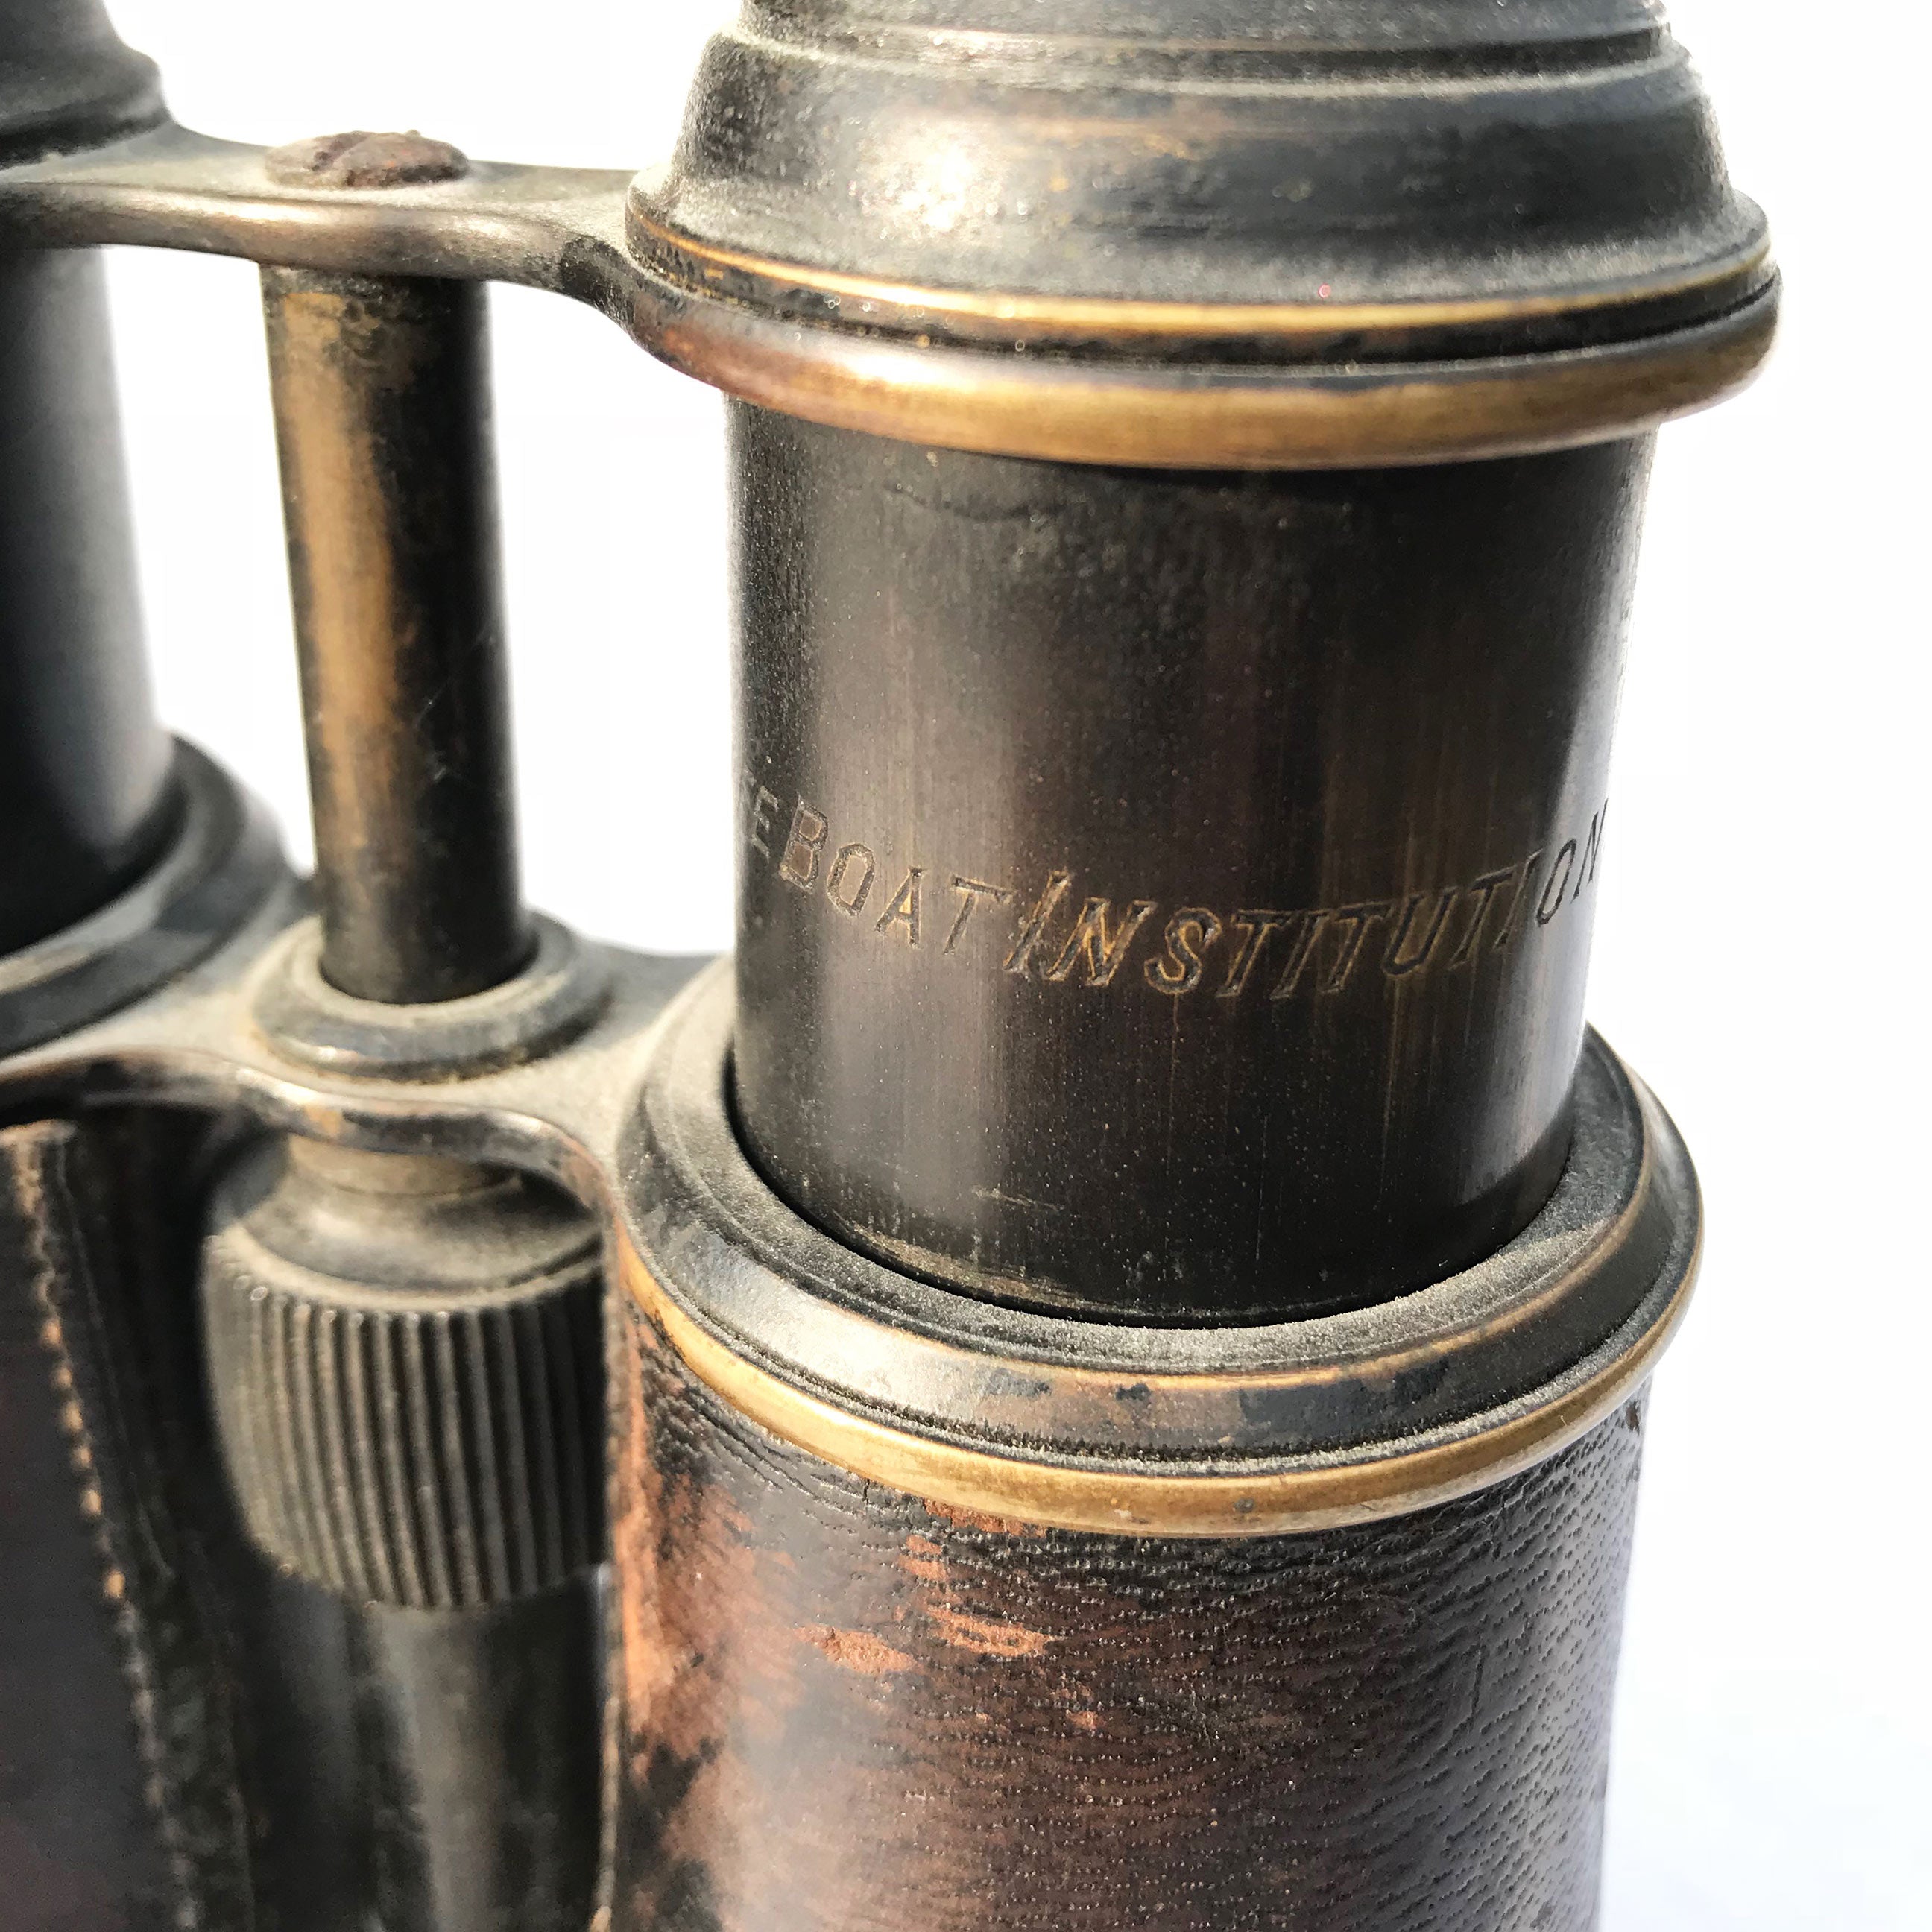 Vintage Brass R.N.L.I Binoculars. Find this and other Beautiful Vintage items for you home at Intovintage.co.uk